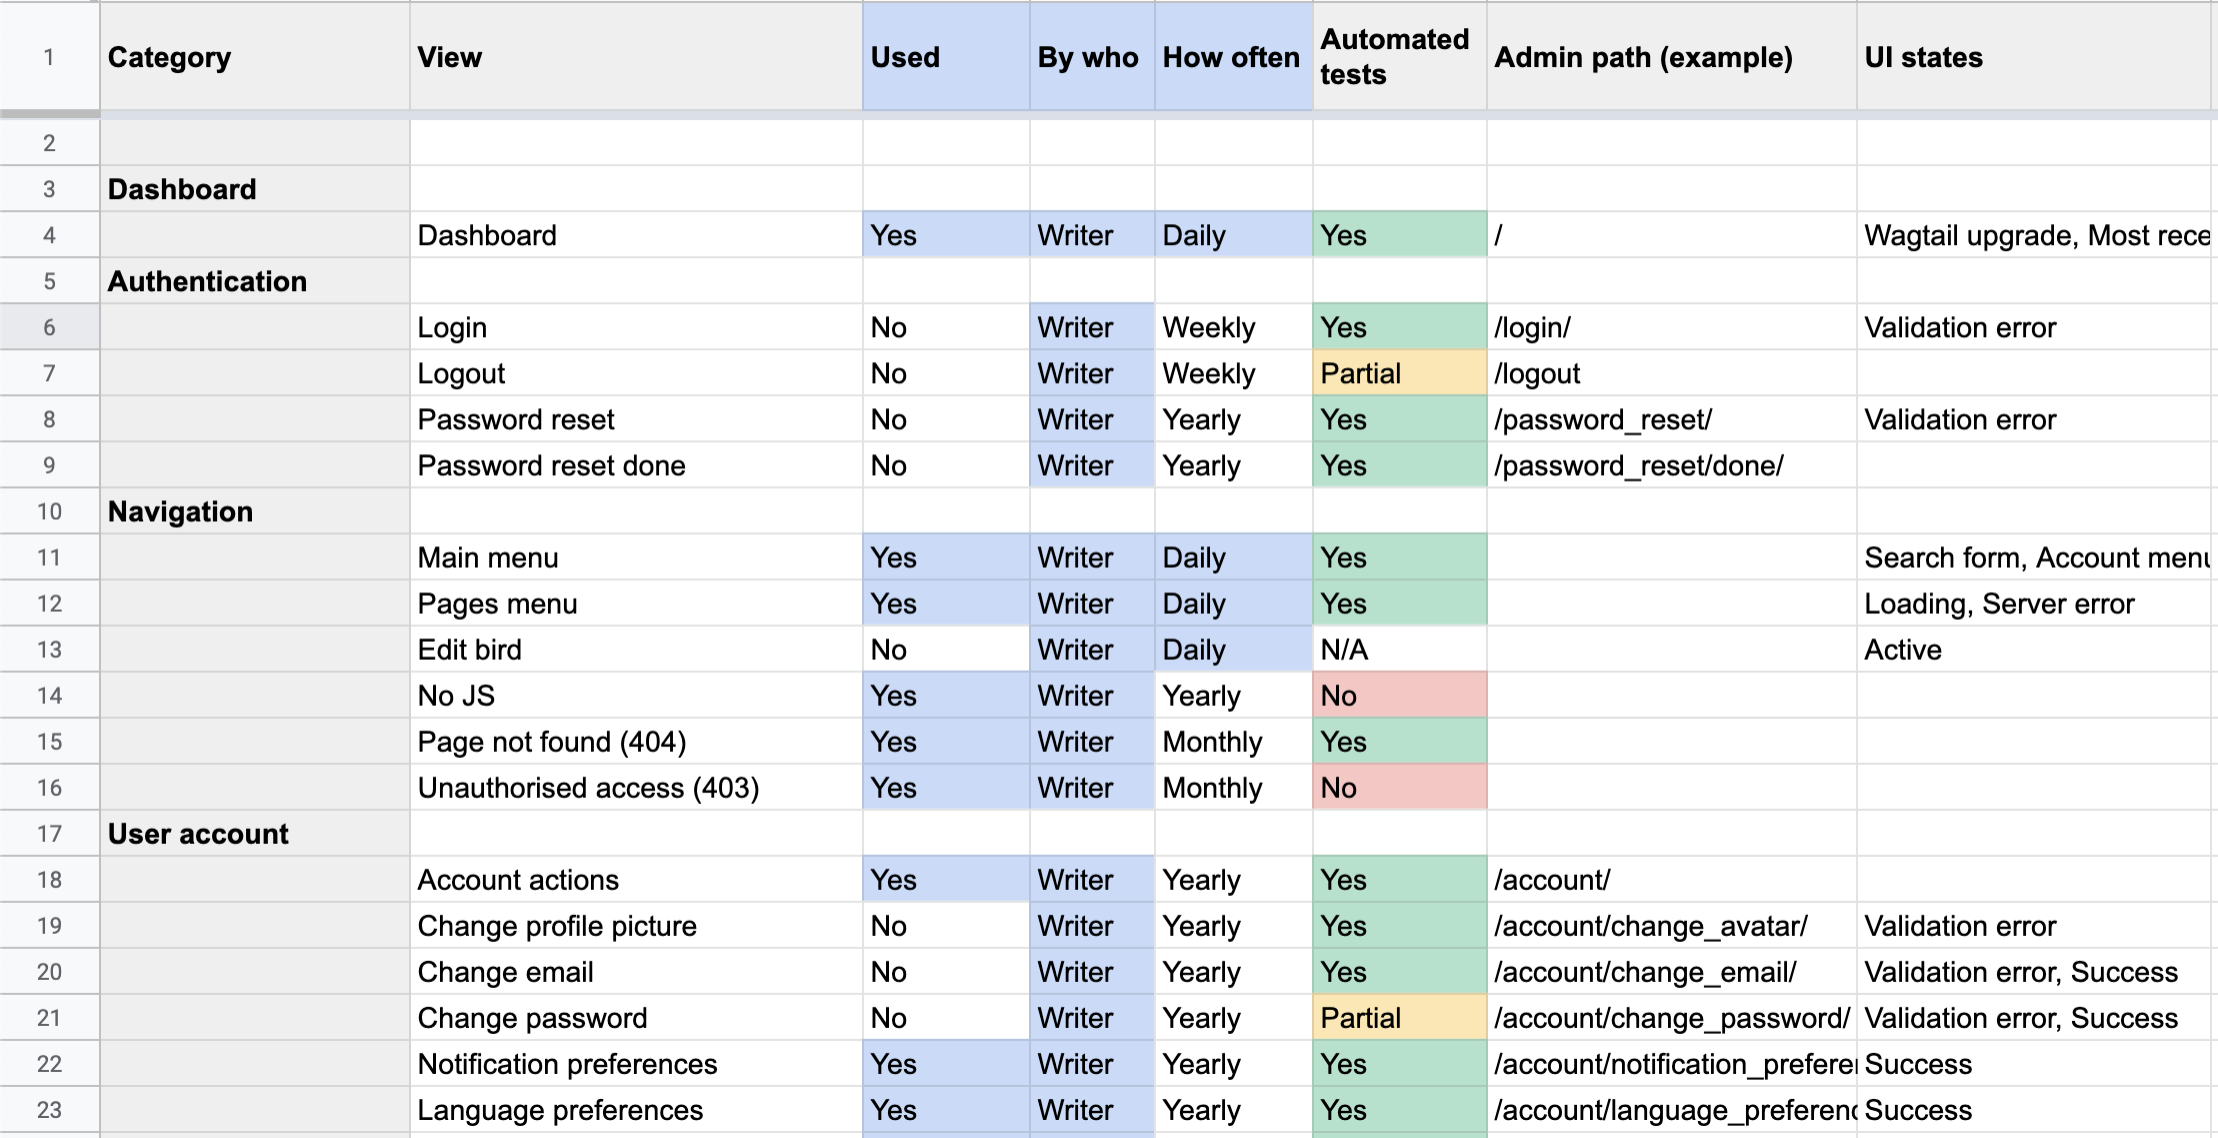 Screenshot of a spreadsheet – different parts of Wagtail as rows, with columns for whether they are used or not, by whom, what states they can be in, and whether automated tests are set up or not